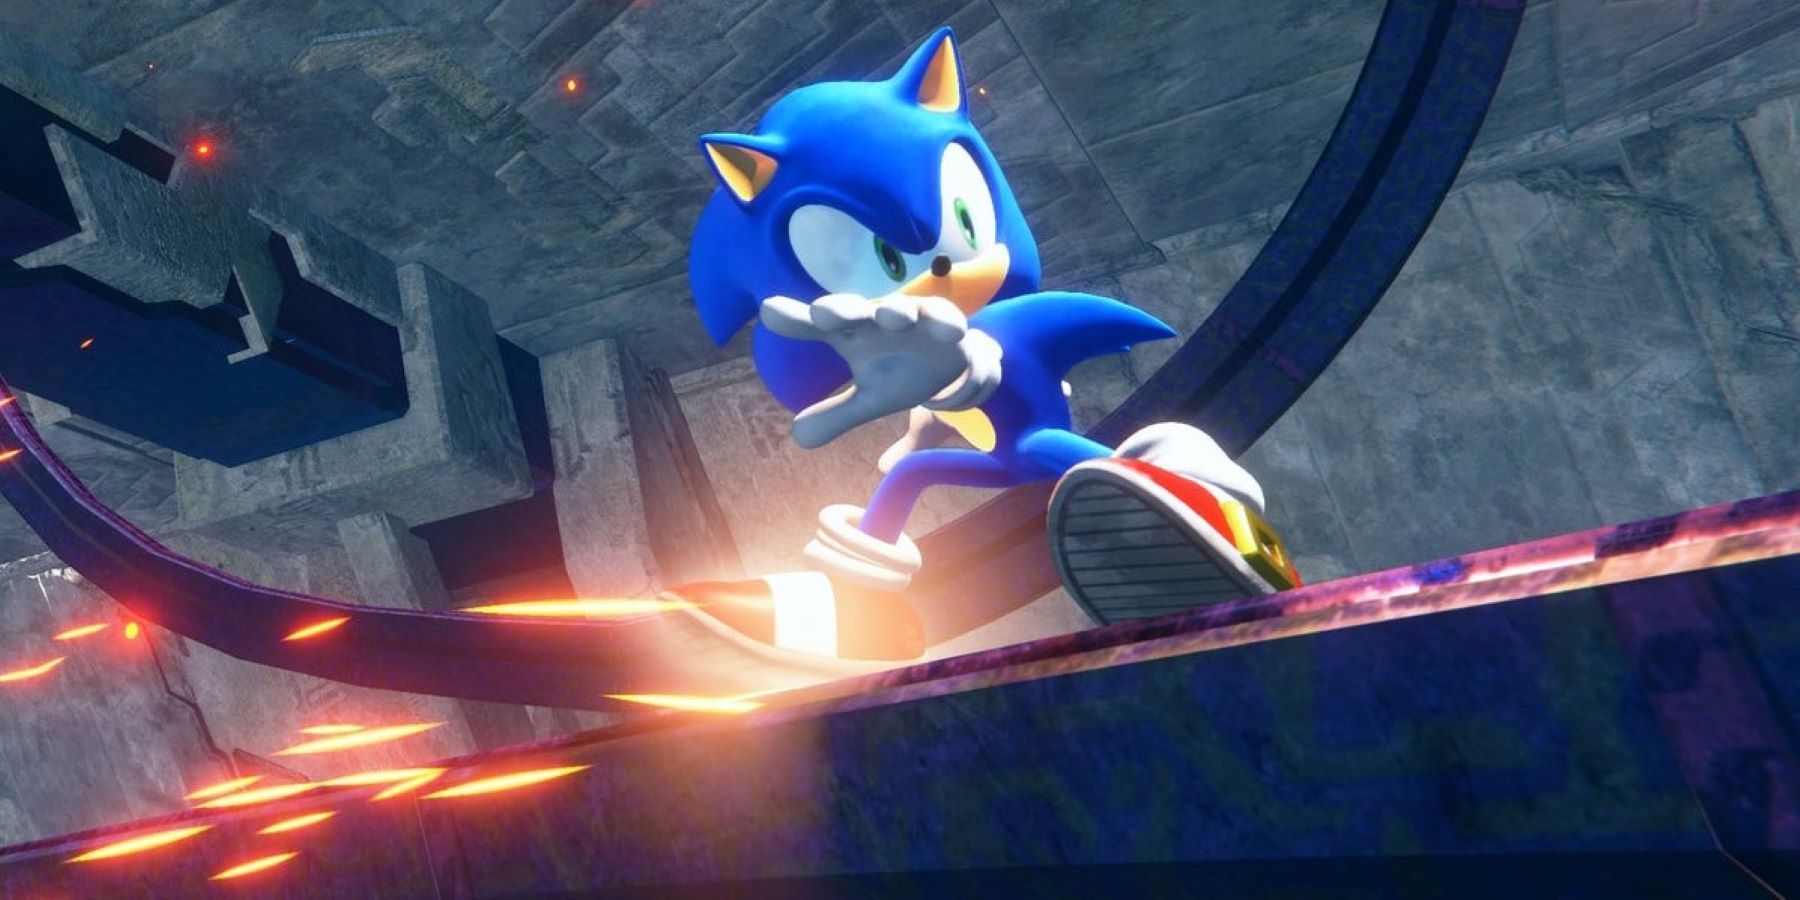 Sonic Frontiers Skin Mods Bring Shadow the Hedgehog and a Project